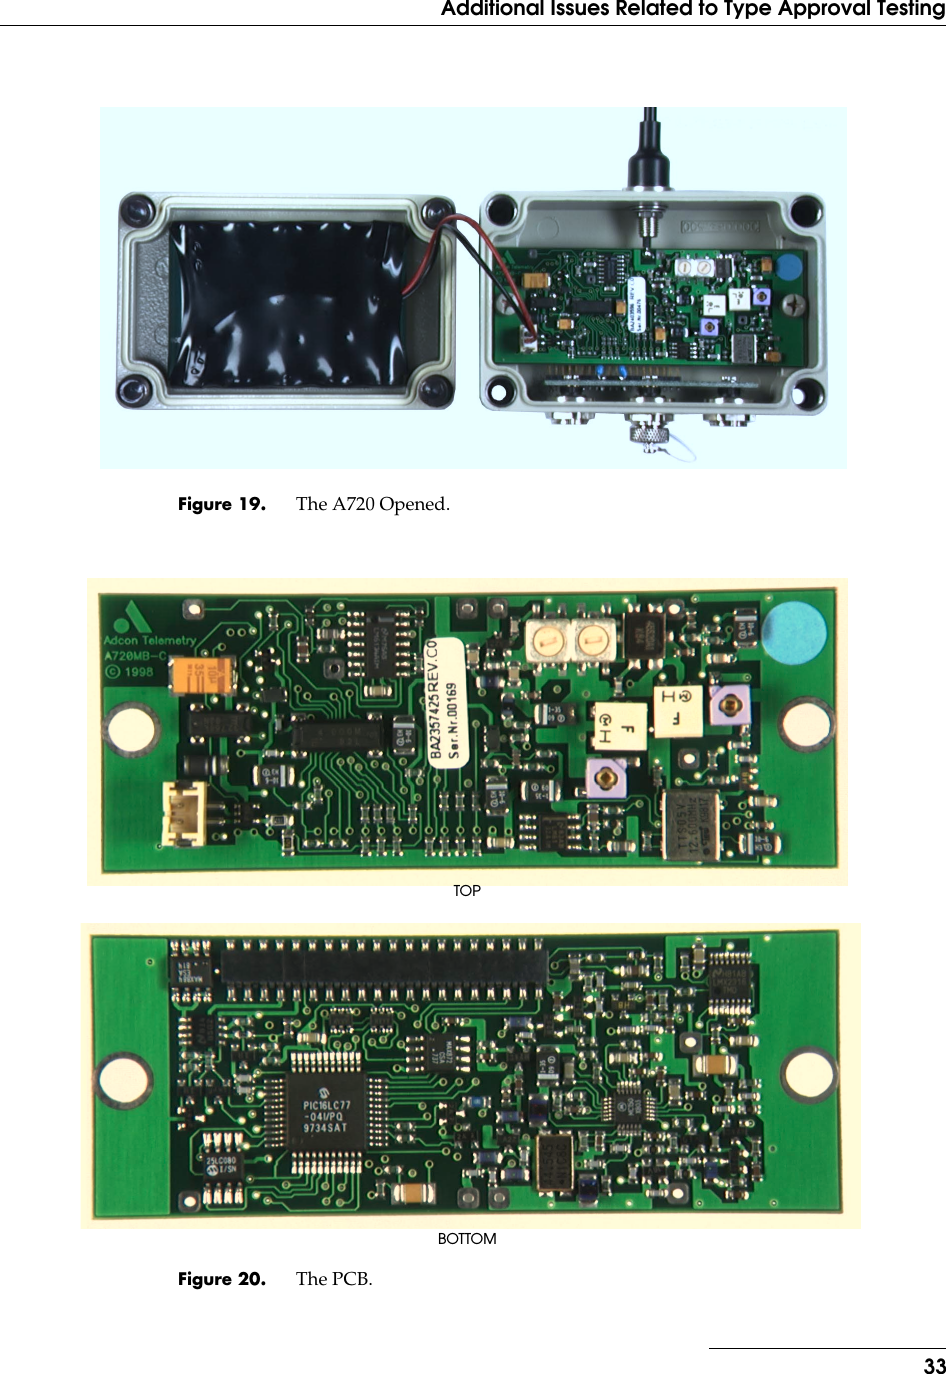 33Additional Issues Related to Type Approval TestingFigure 19. The A720 Opened.Figure 20. The PCB.TOPBOTTOM